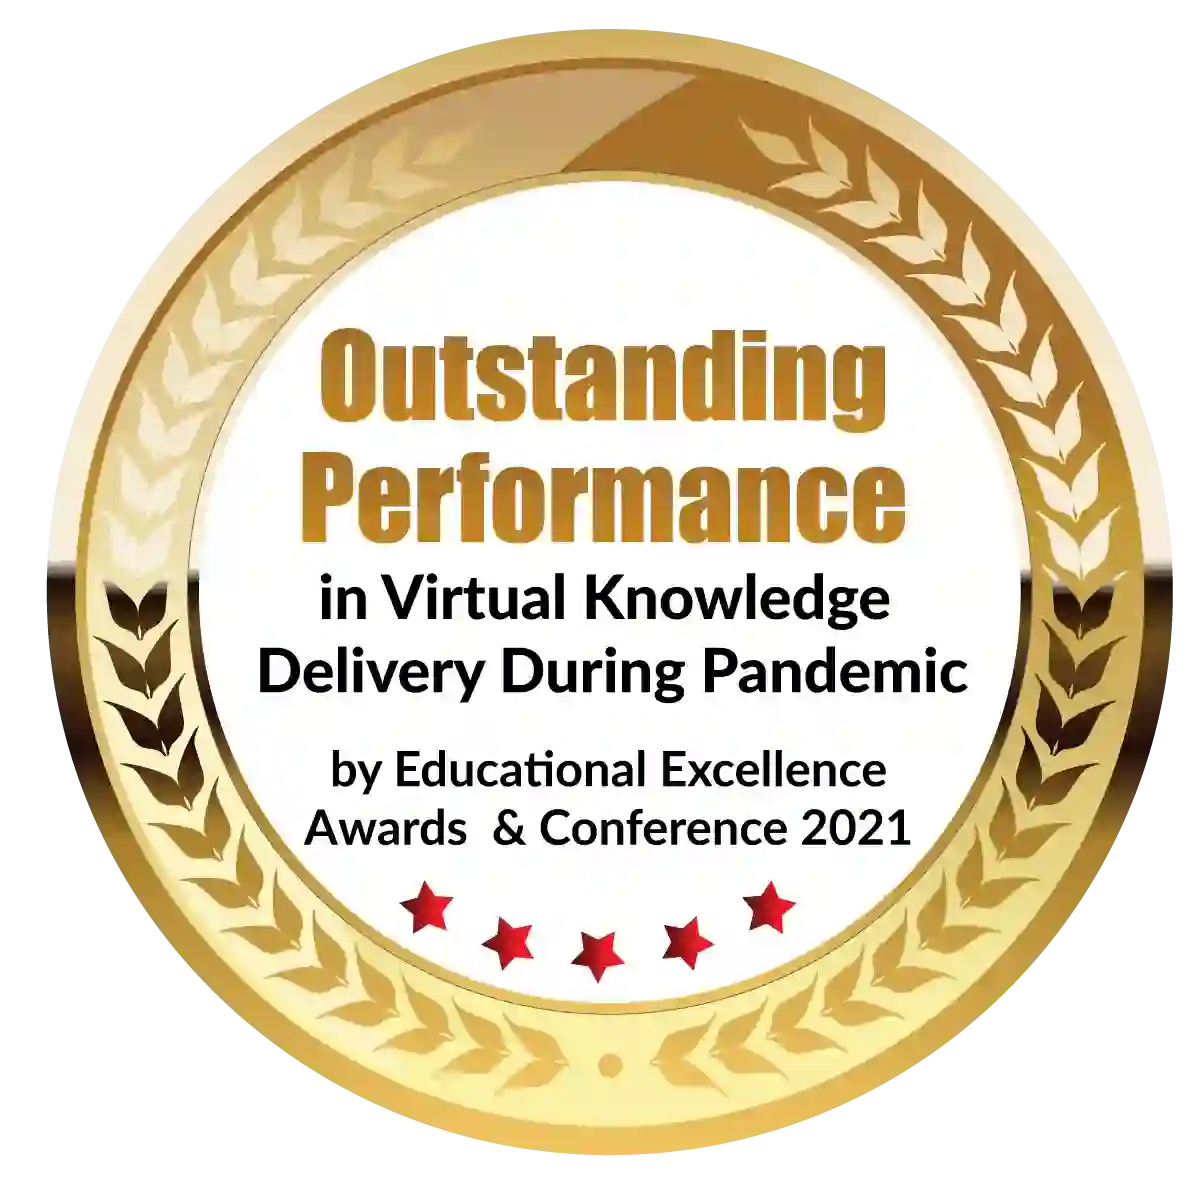 Outstanding Performance in Virtual Knowledge Delivery During Pandemic